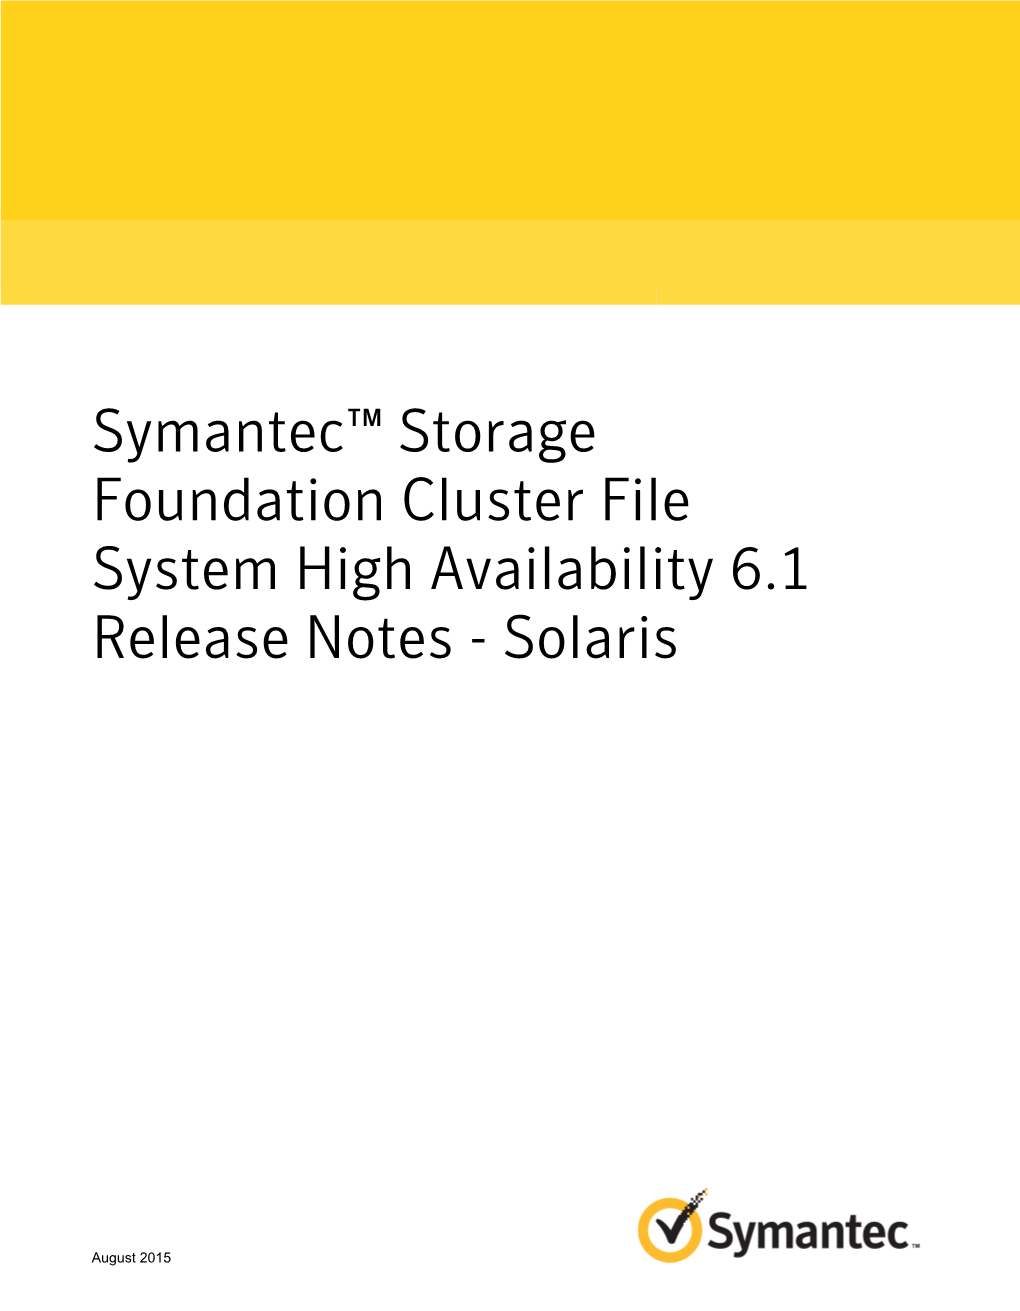 Symantec™ Storage Foundation Cluster File System High Availability 6.1 Release Notes - Solaris